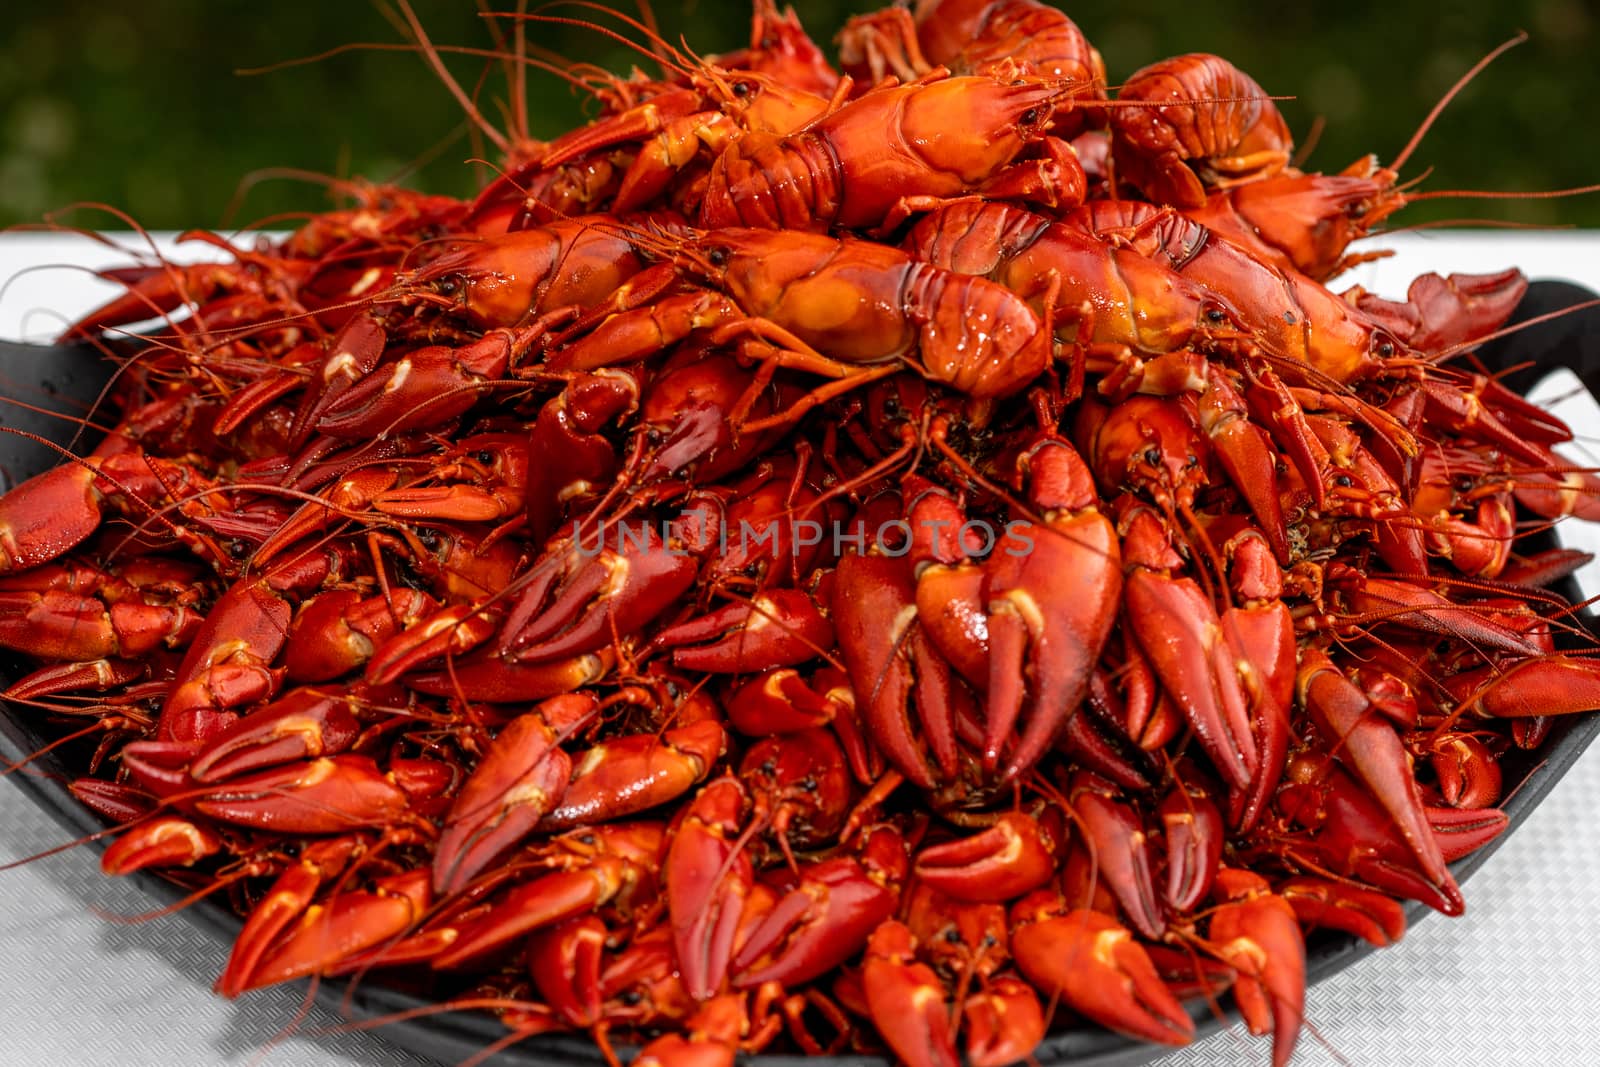 A lot of cooked signal crayfish, Pacifastacus leniusculus, ready to eat